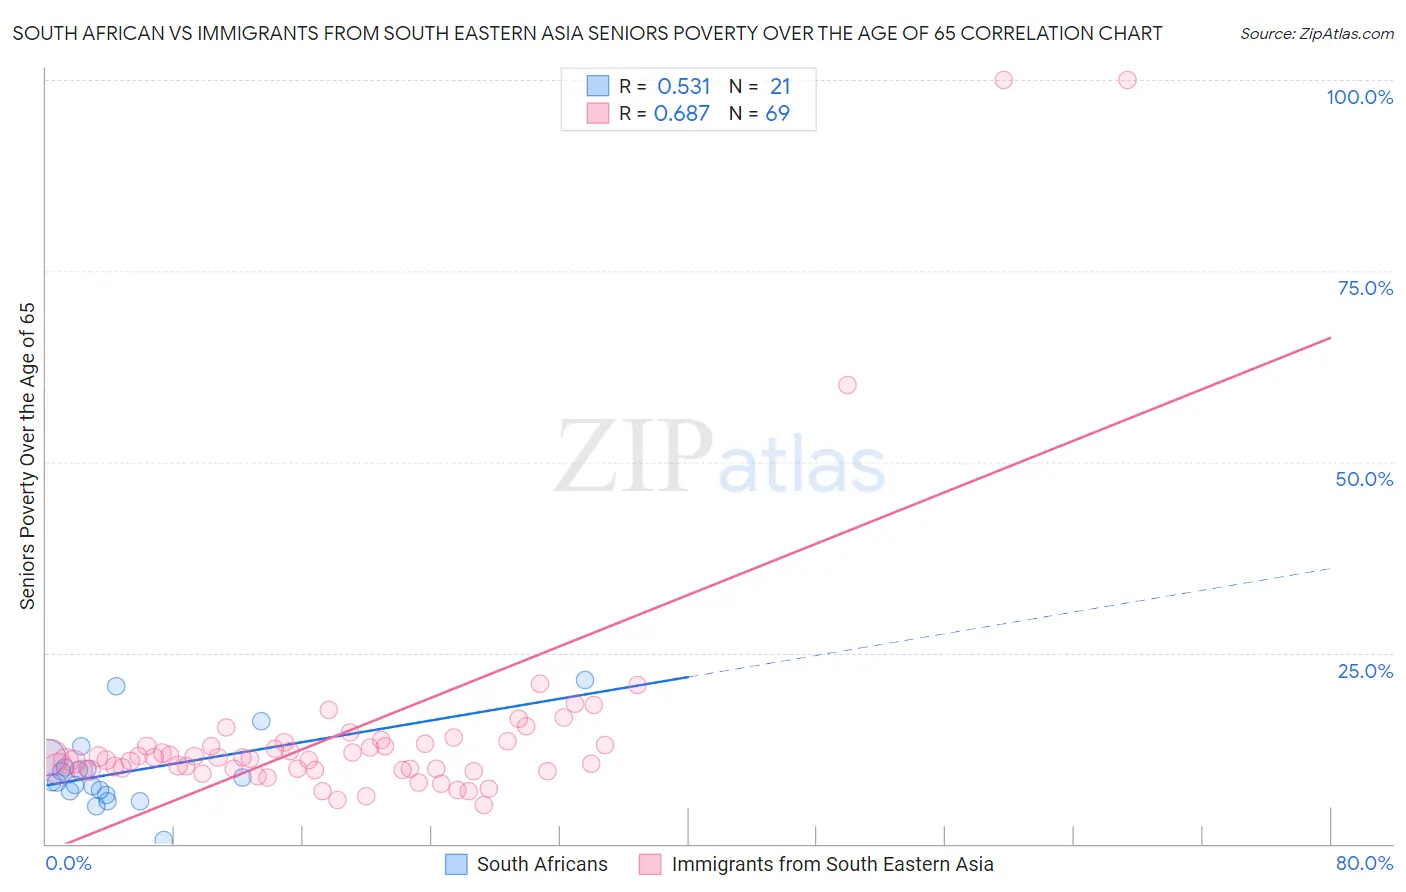 South African vs Immigrants from South Eastern Asia Seniors Poverty Over the Age of 65